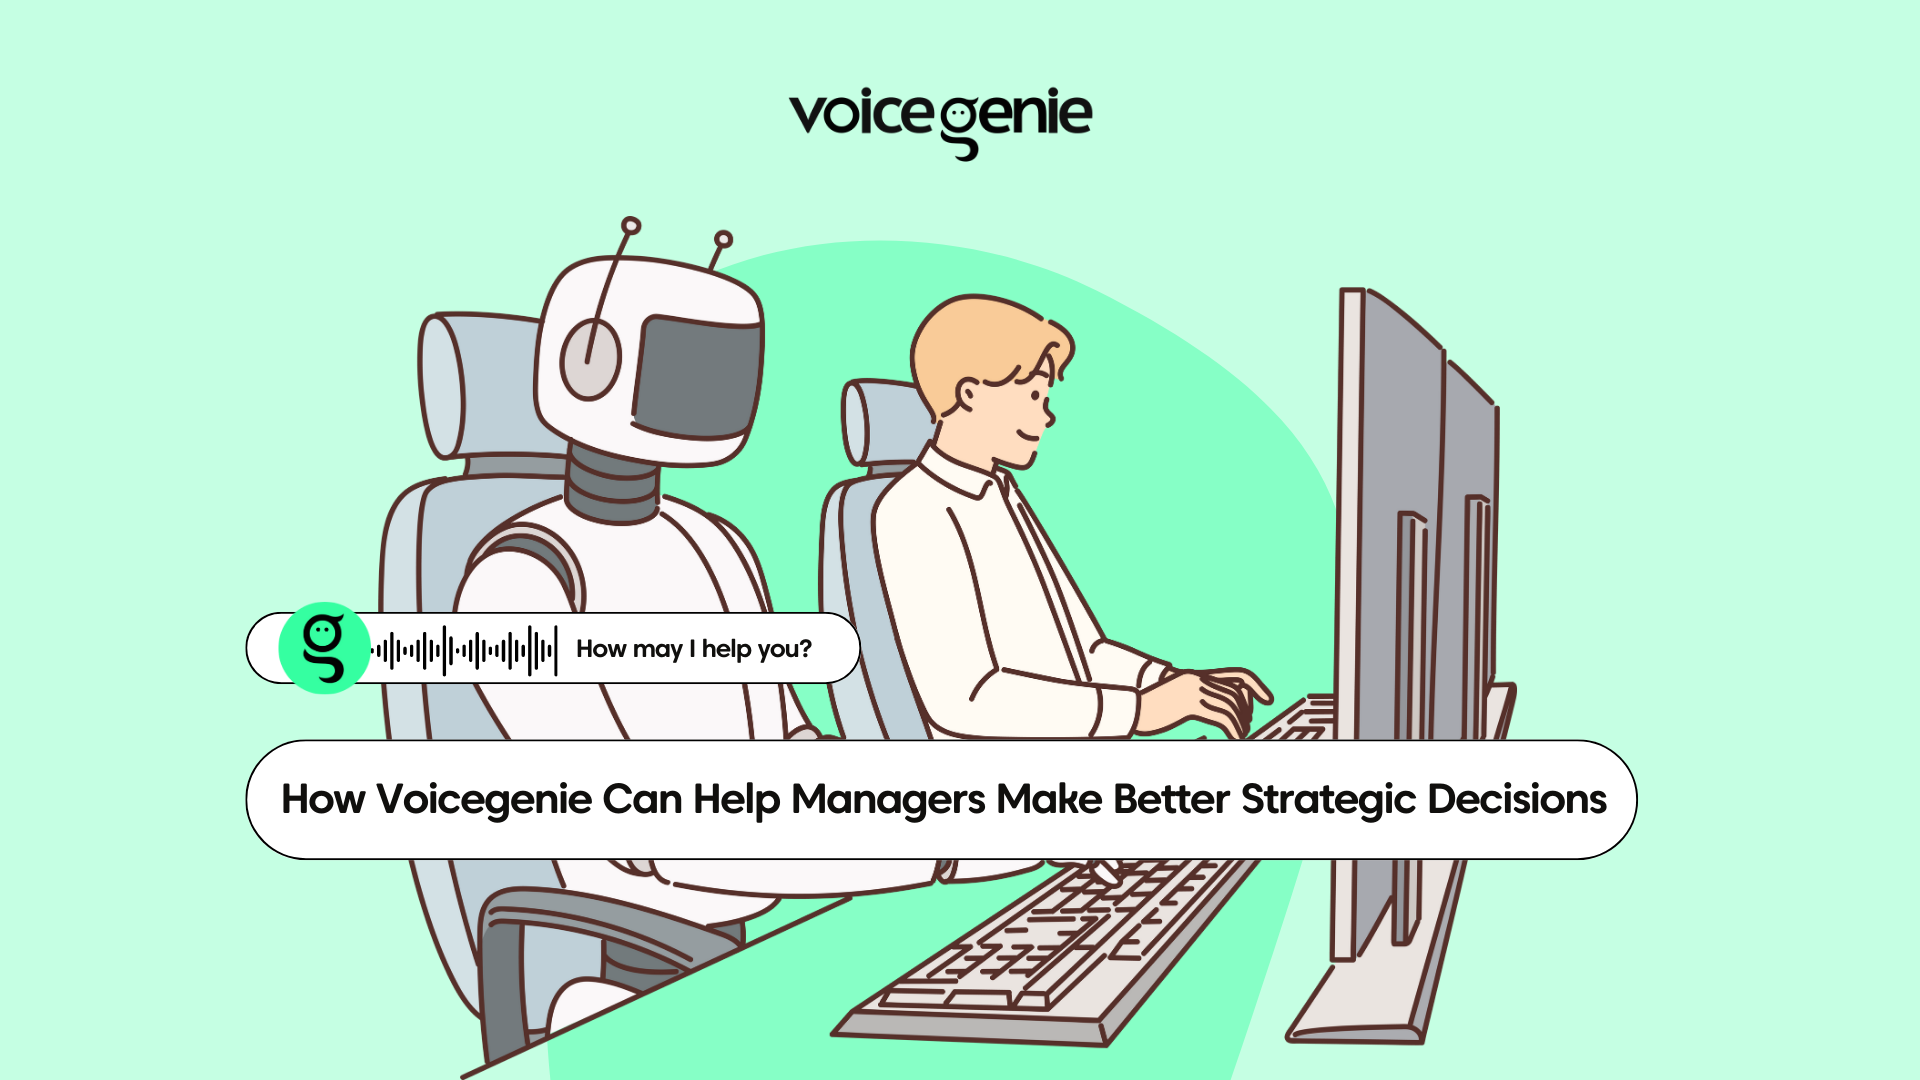 VoiceGenie working with an Operations Manager and helping him take better decisions